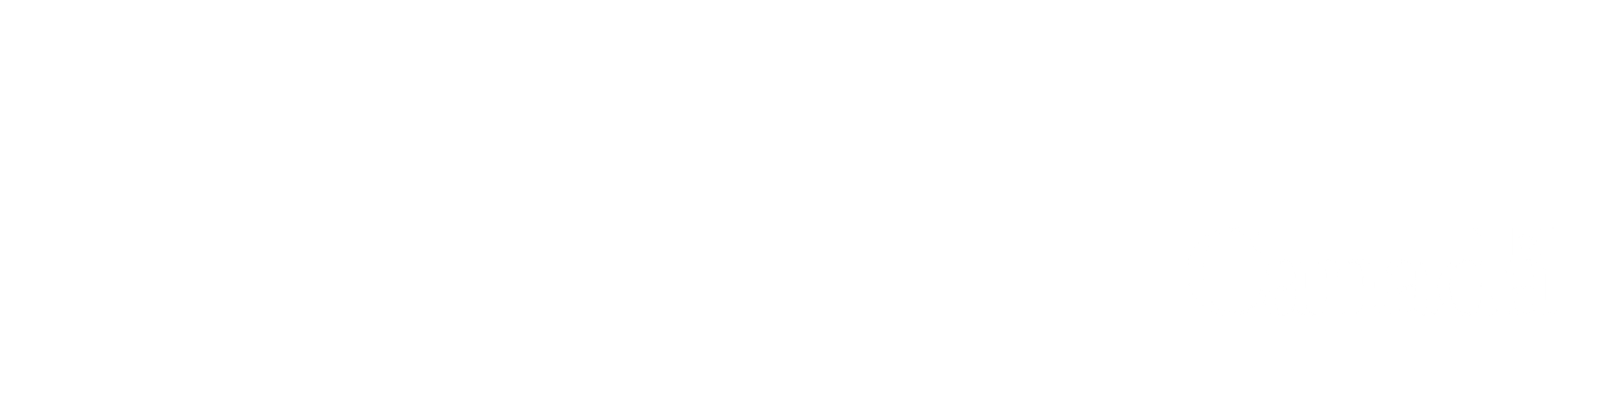 Upskill Canada and Government of Canada logos